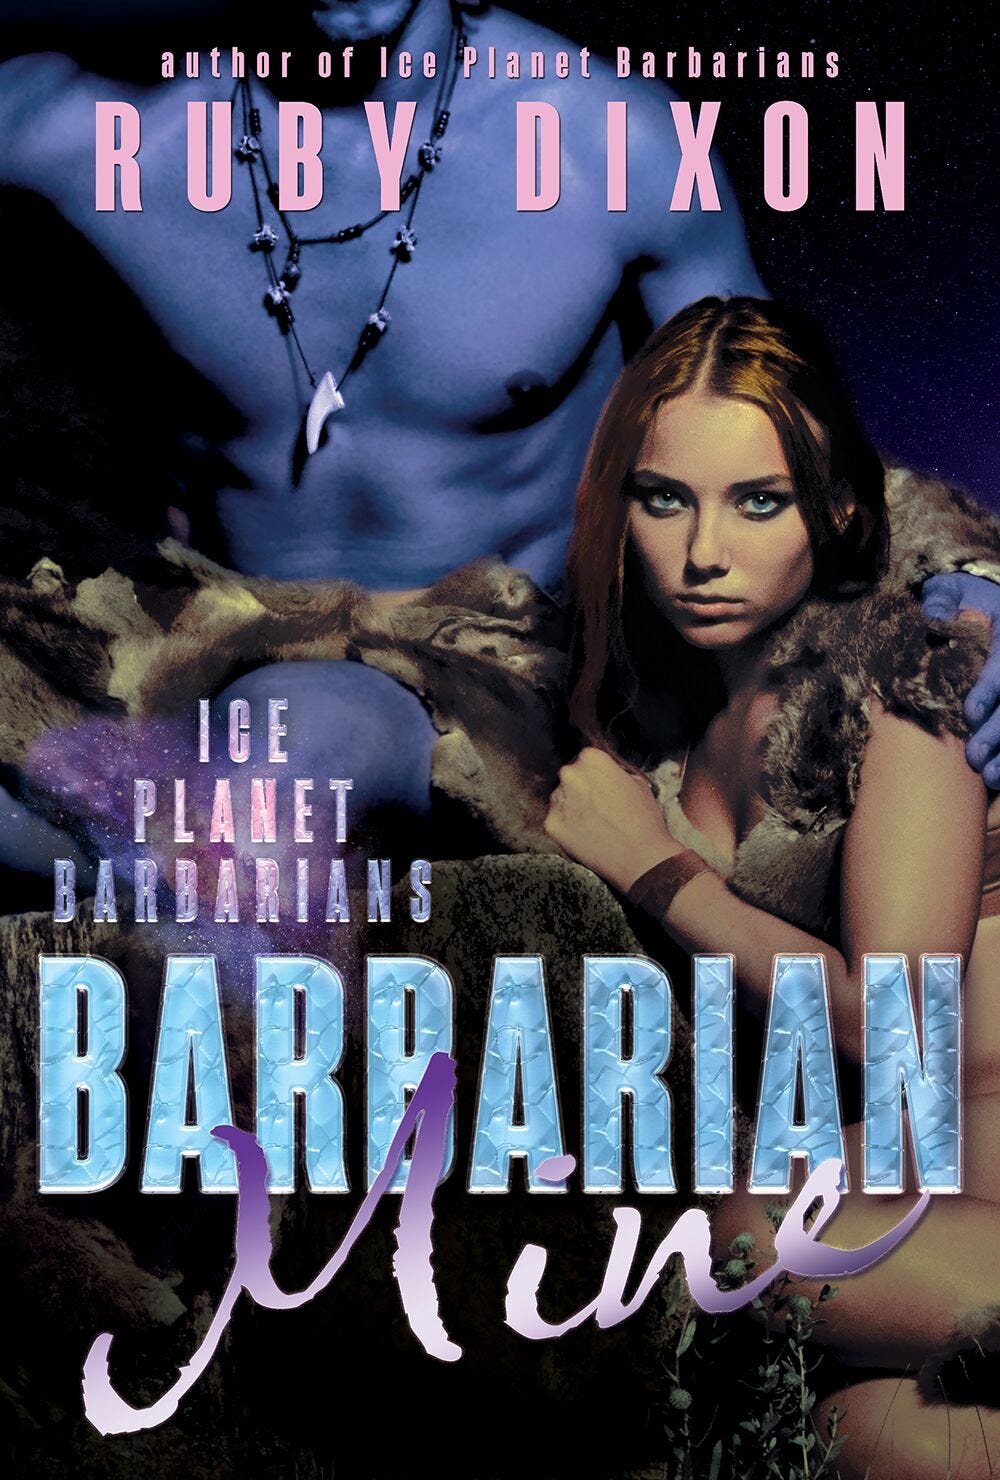 Cover of Barbarian Mine by Ruby Dixon. A read-head woman in furs sits below a blue man